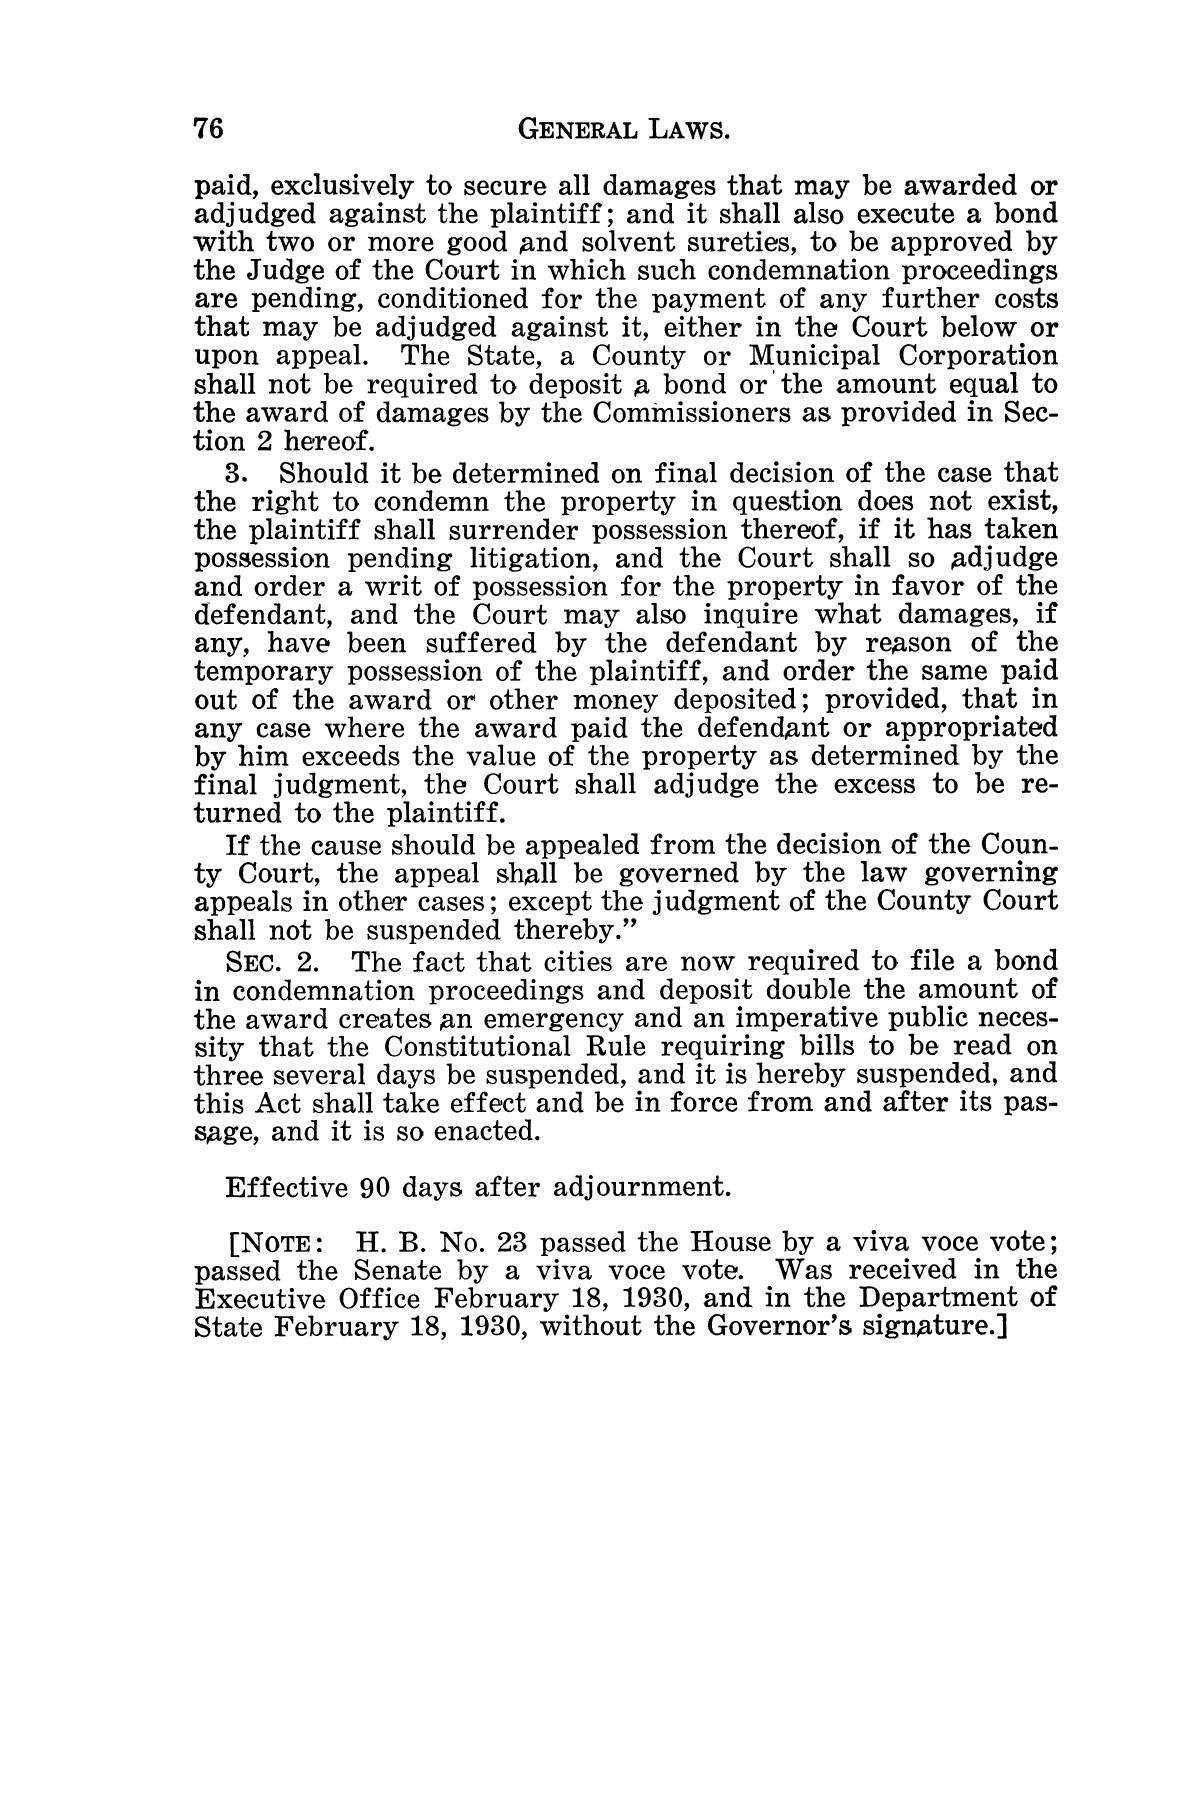 The Laws of Texas, 1929-1931 [Volume 27]
                                                
                                                    [Sequence #]: 88 of 1943
                                                